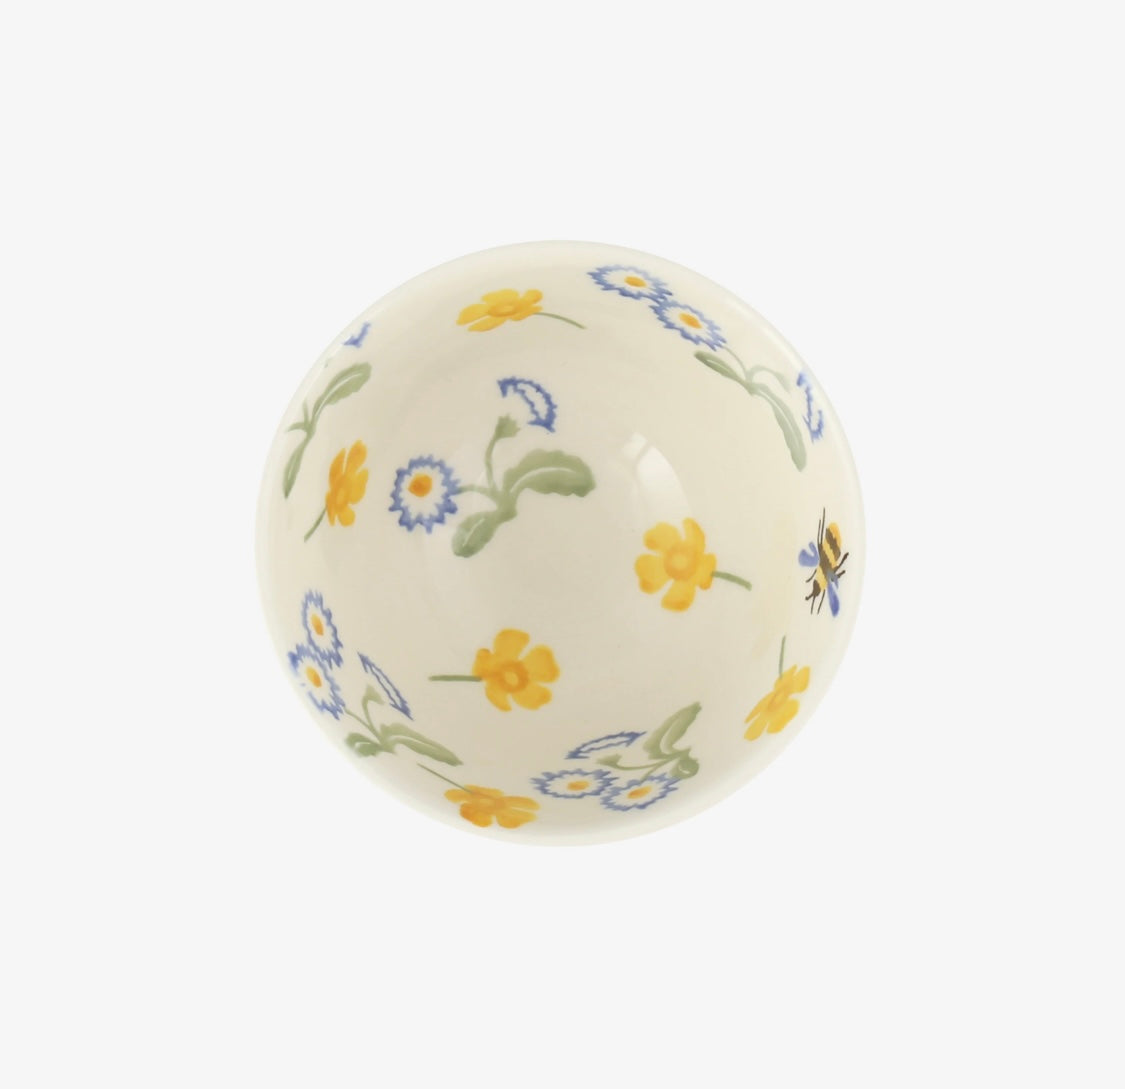 Emma Bridgewater Buttercup & Daisies Small Old Bowl 12.5cm 300ml